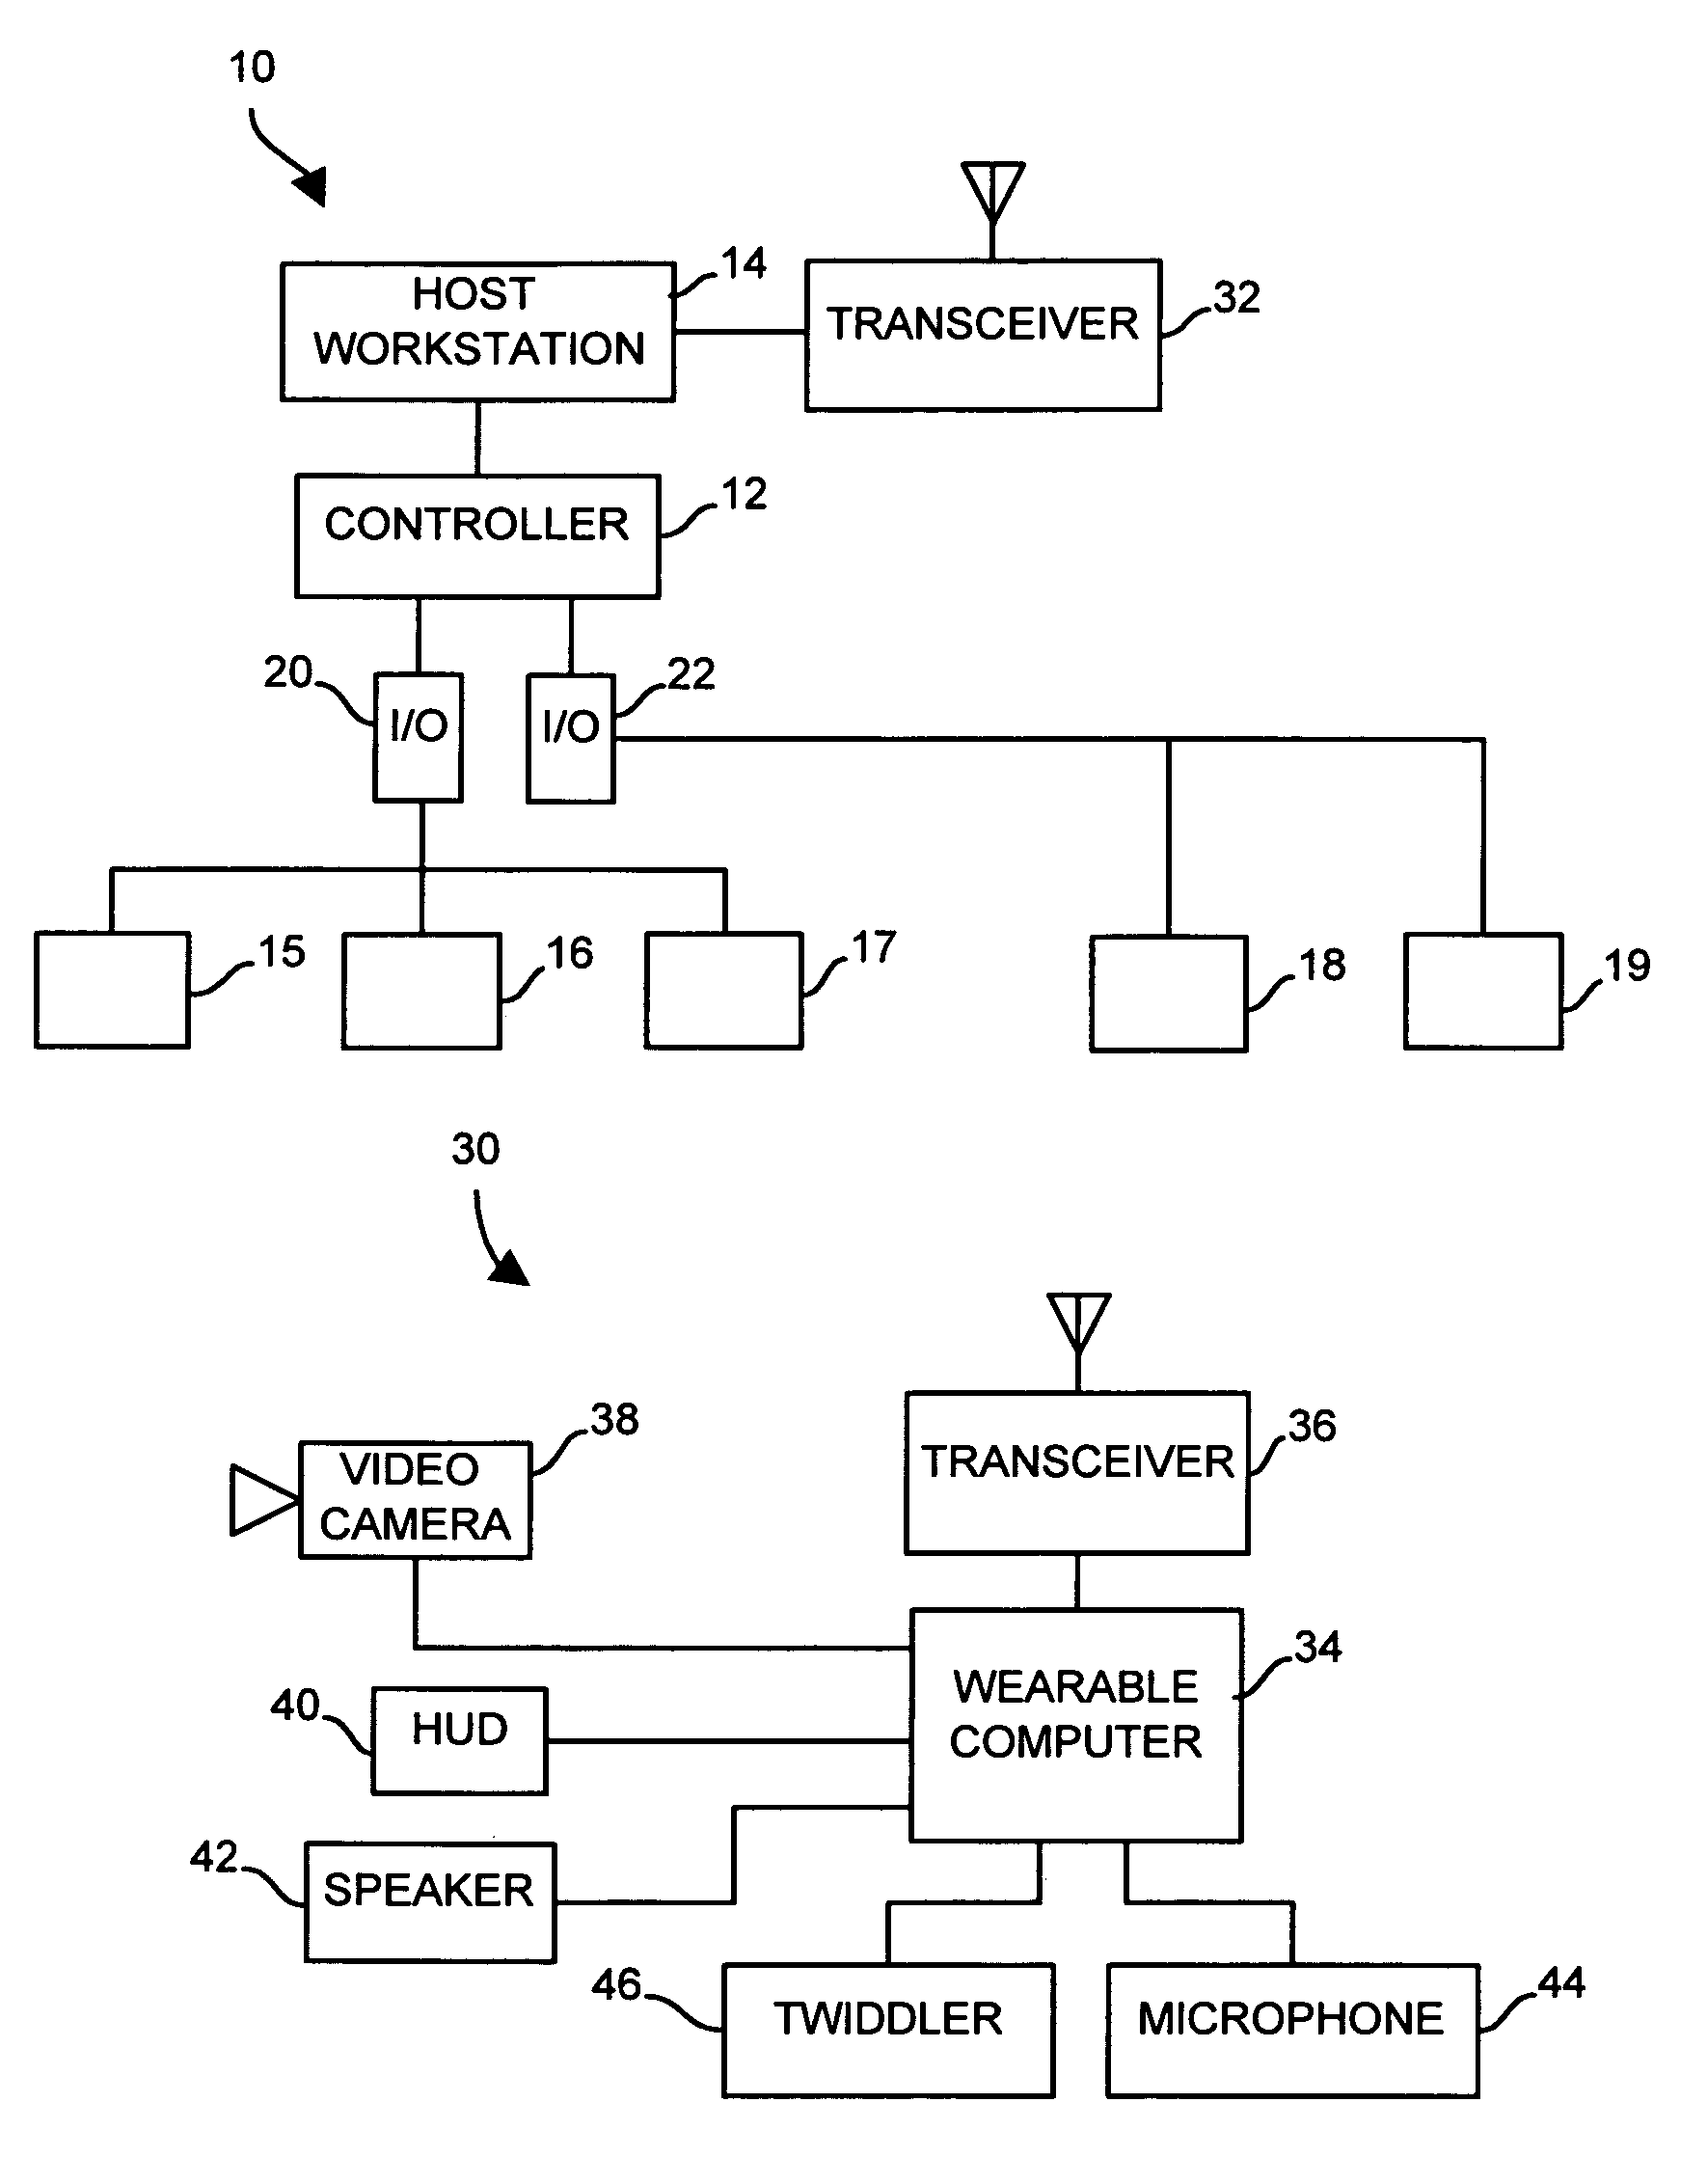 Wearable computer in a process control environment